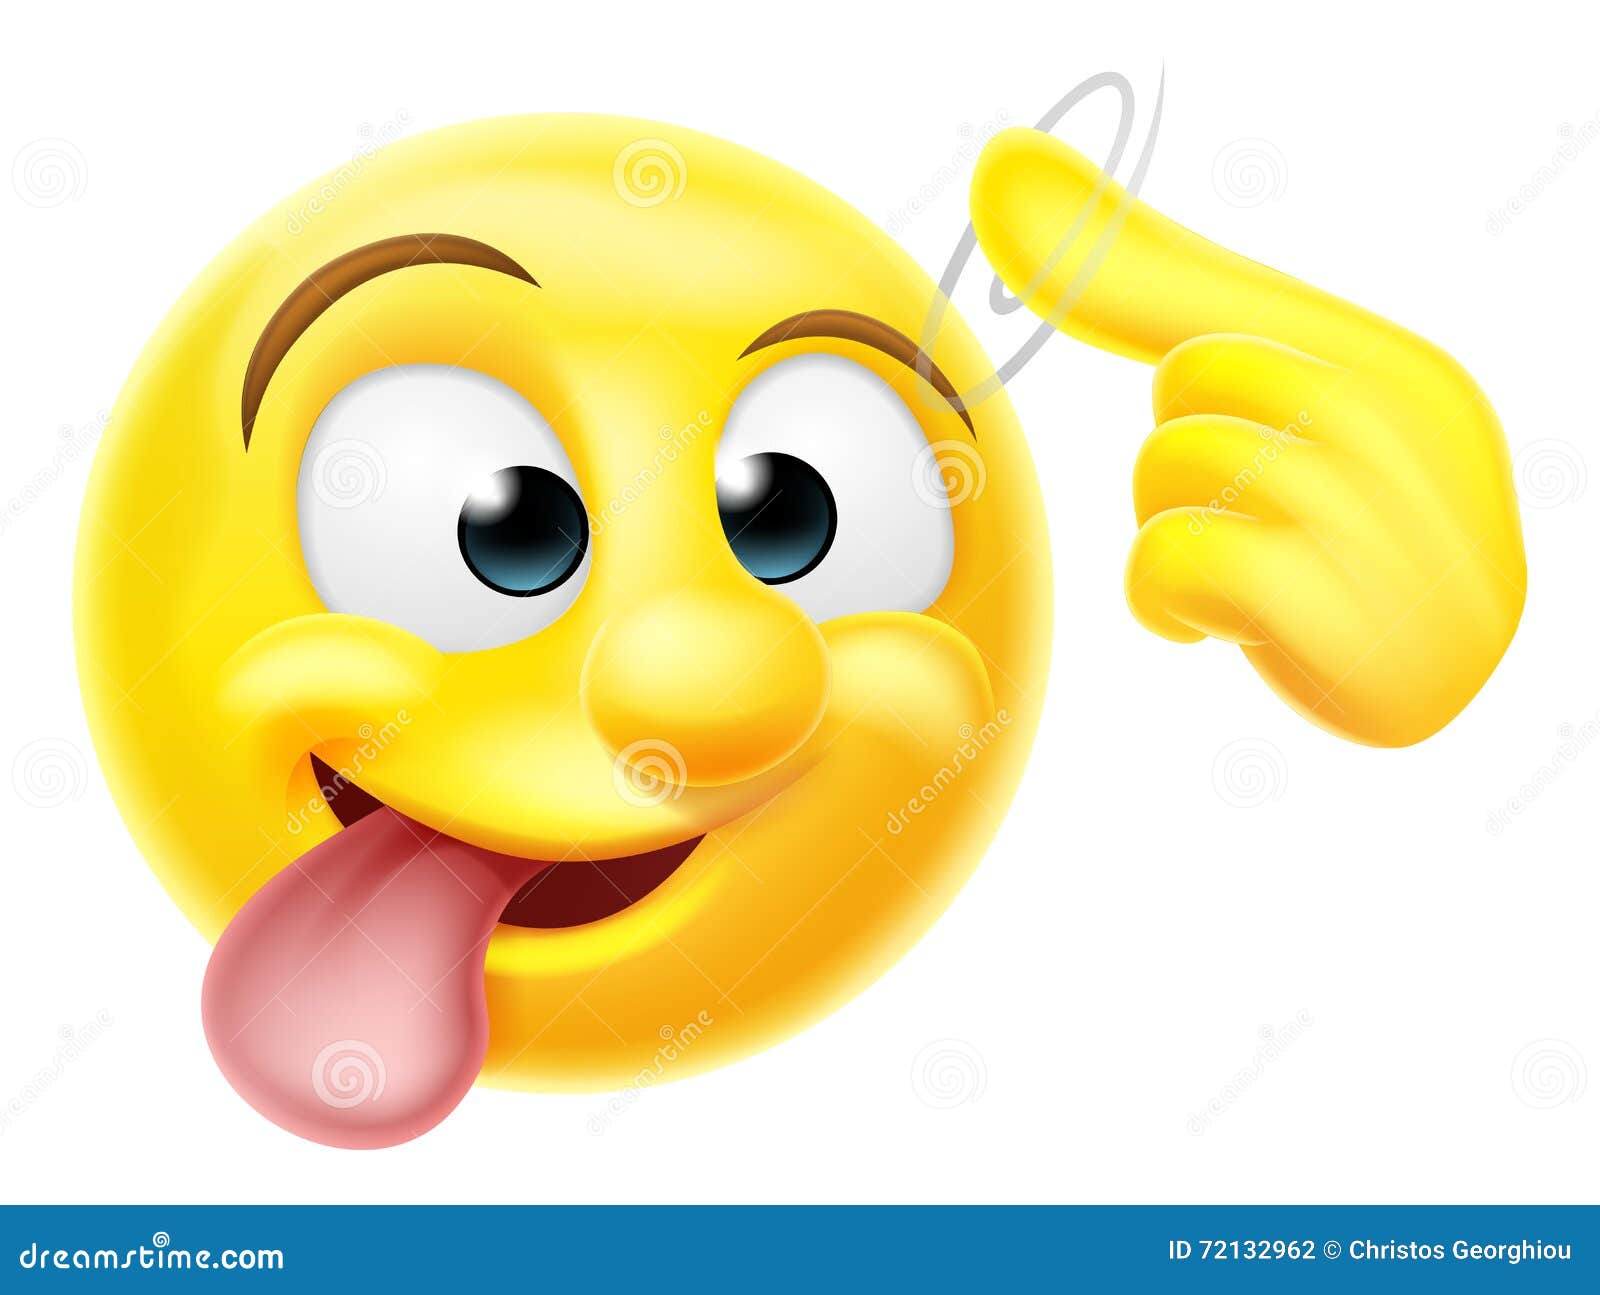 crazy-emoji-emoticon-character-happy-smiley-face-pointing-his-her-head-making-screw-loose-gesture-72132962.jpg